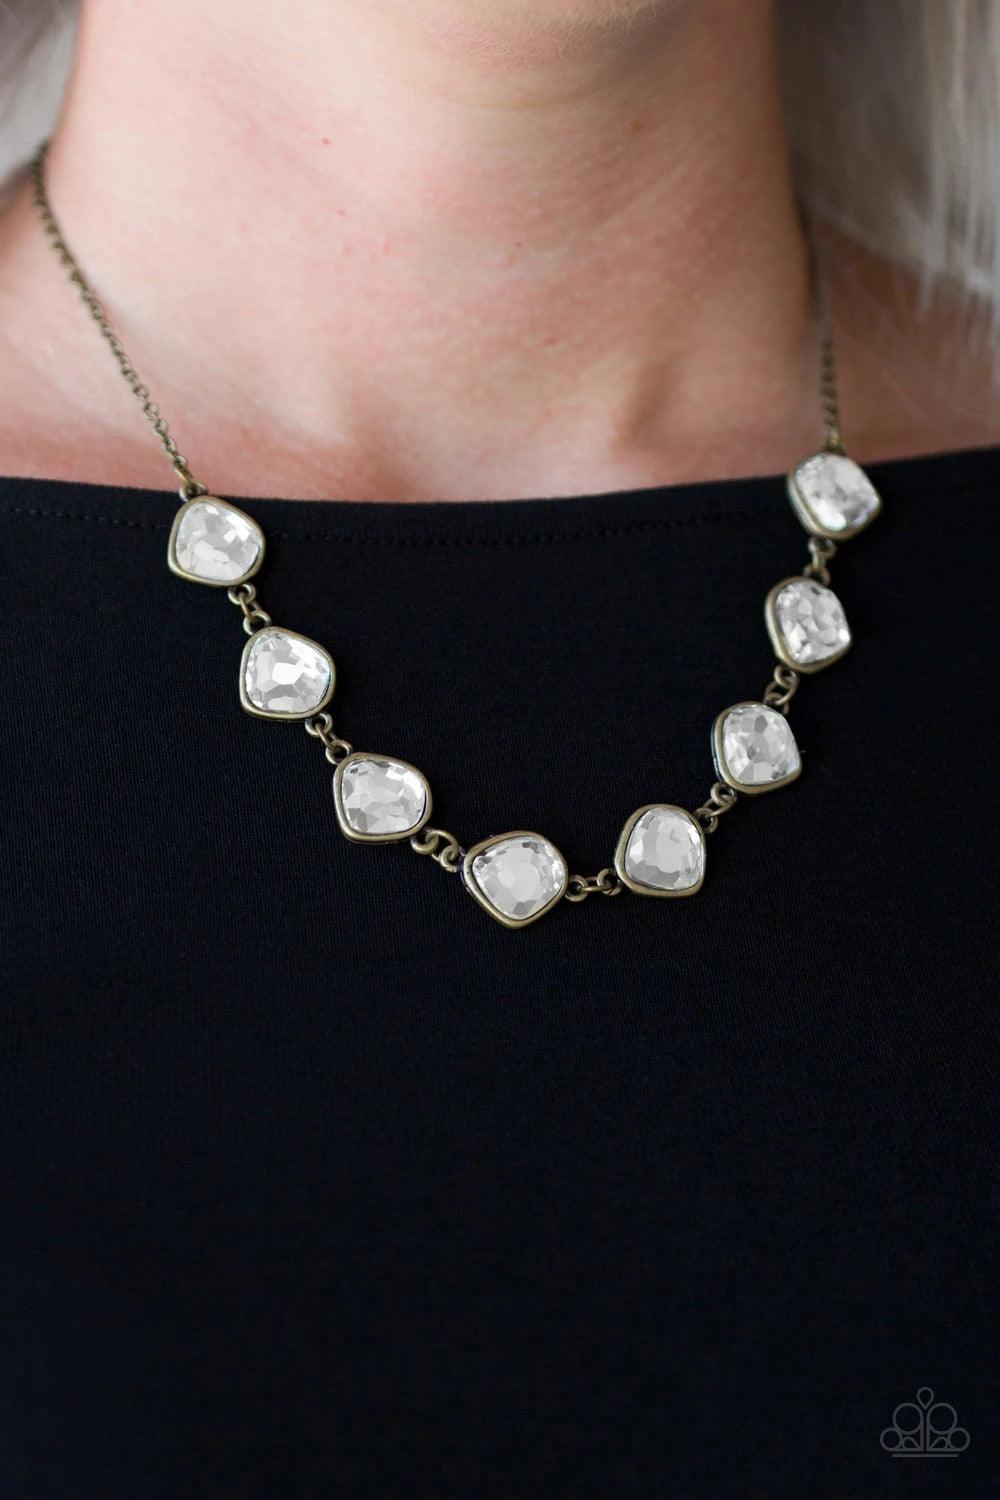 Paparazzi Accessories The Imperfectionist - Brass Featuring antiqued brass frames, imperfect glassy white gems link below the collar for a glamorous vintage inspired look. Features an adjustable clasp closure. Sold as one individual necklace. Includes one